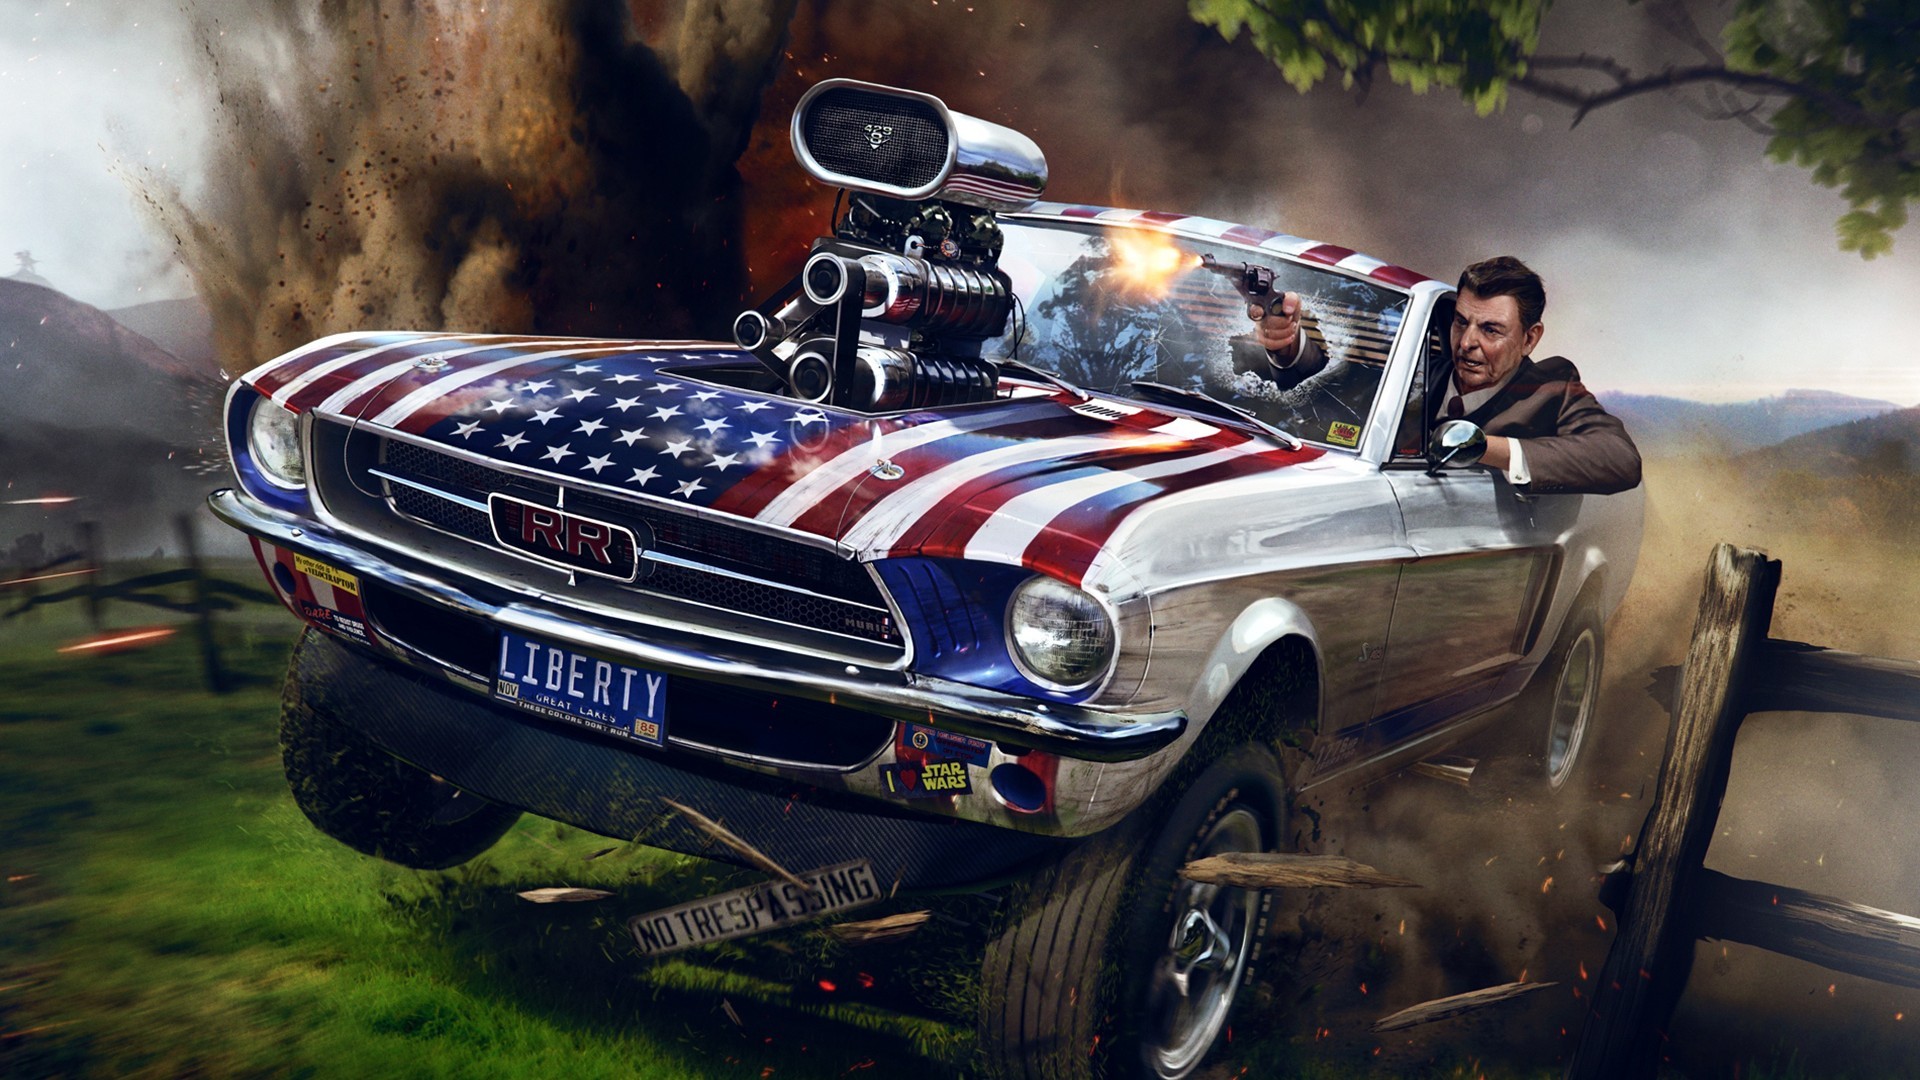 General 1920x1080 Ford Mustang gun explosion hills USA humor car American flag vehicle weapon